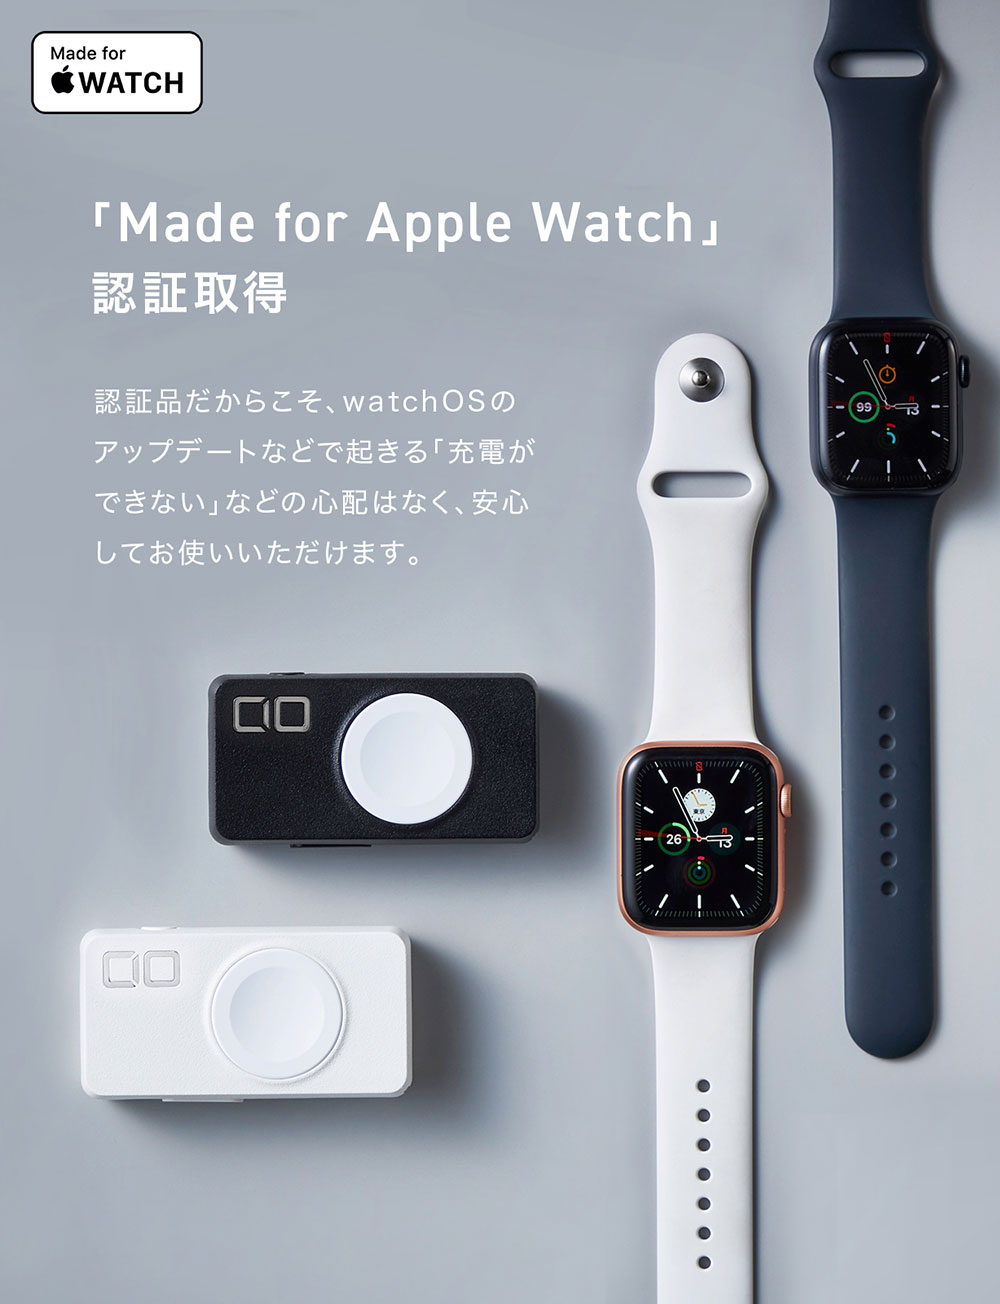 「Made for Apple Watch」認証取得